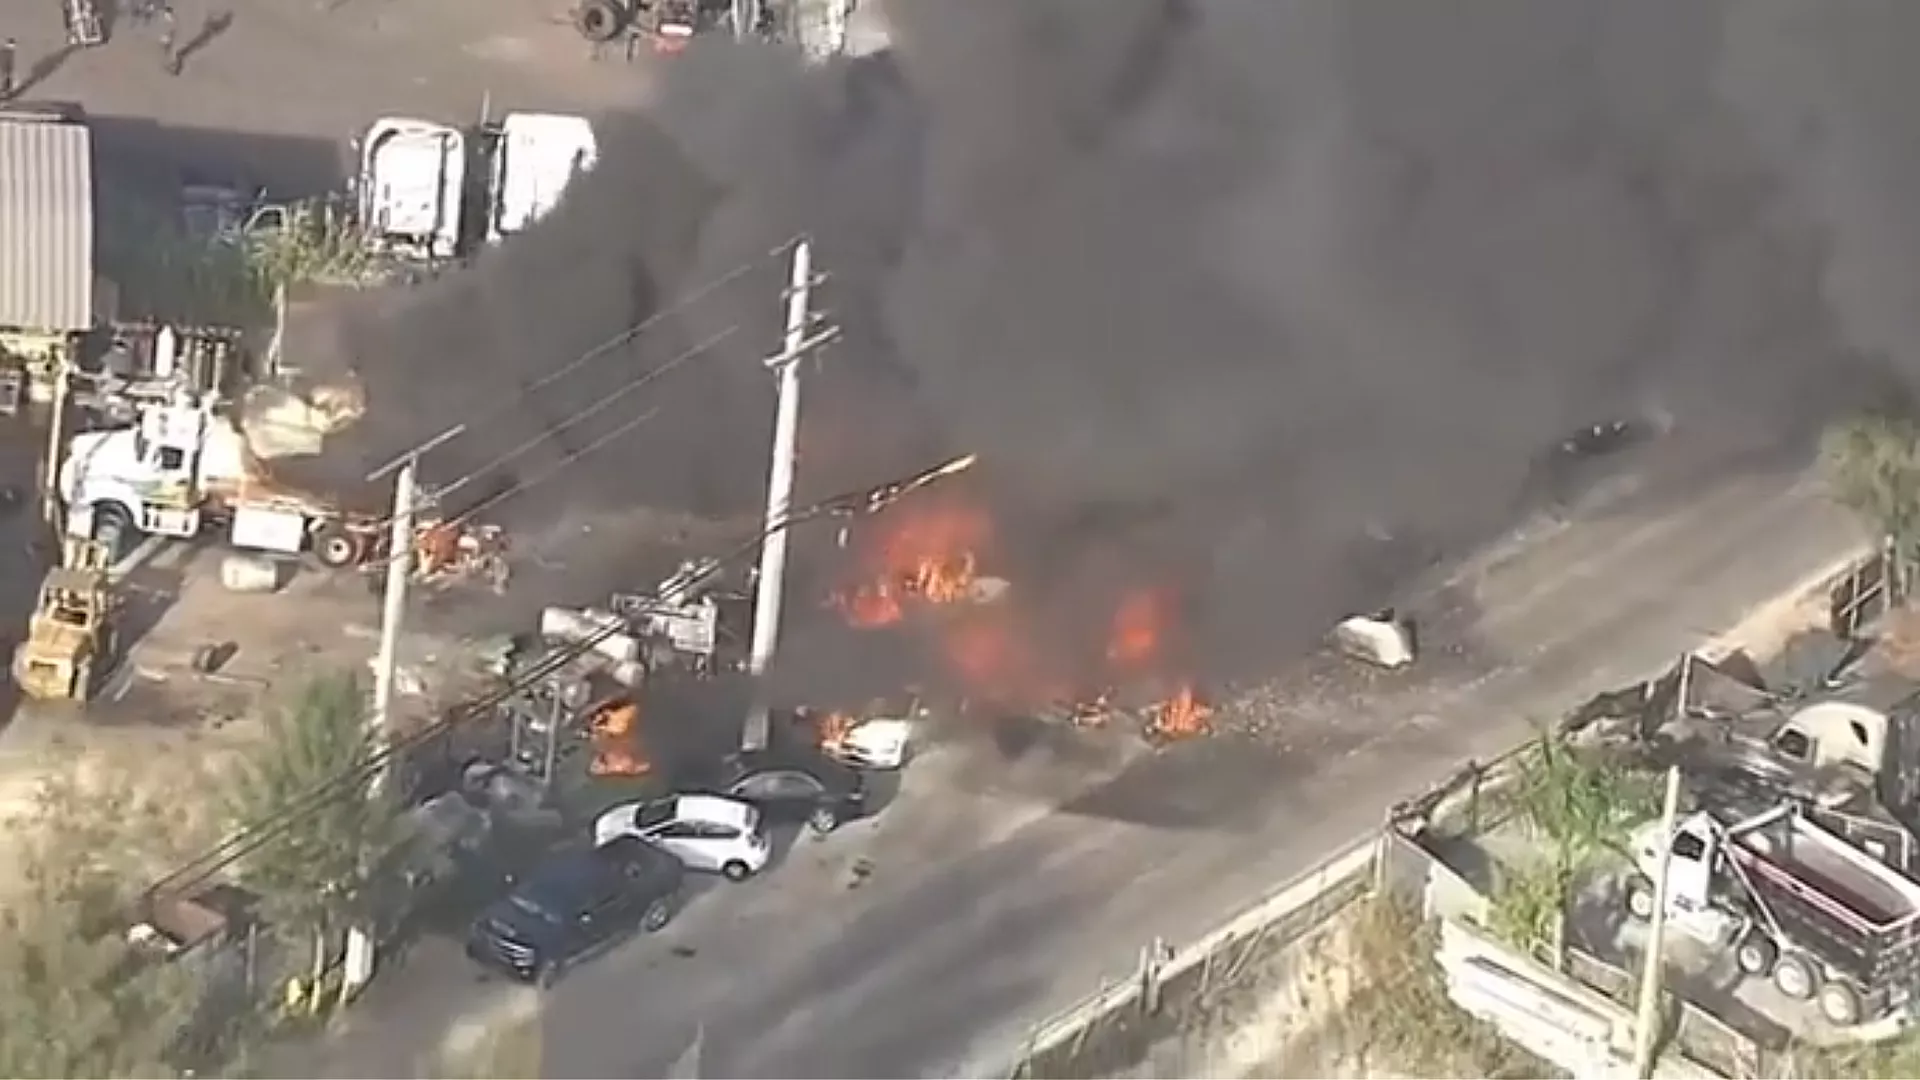 At Least Two Reported Dead at Factory Explosion, Fire in Miami Suburb